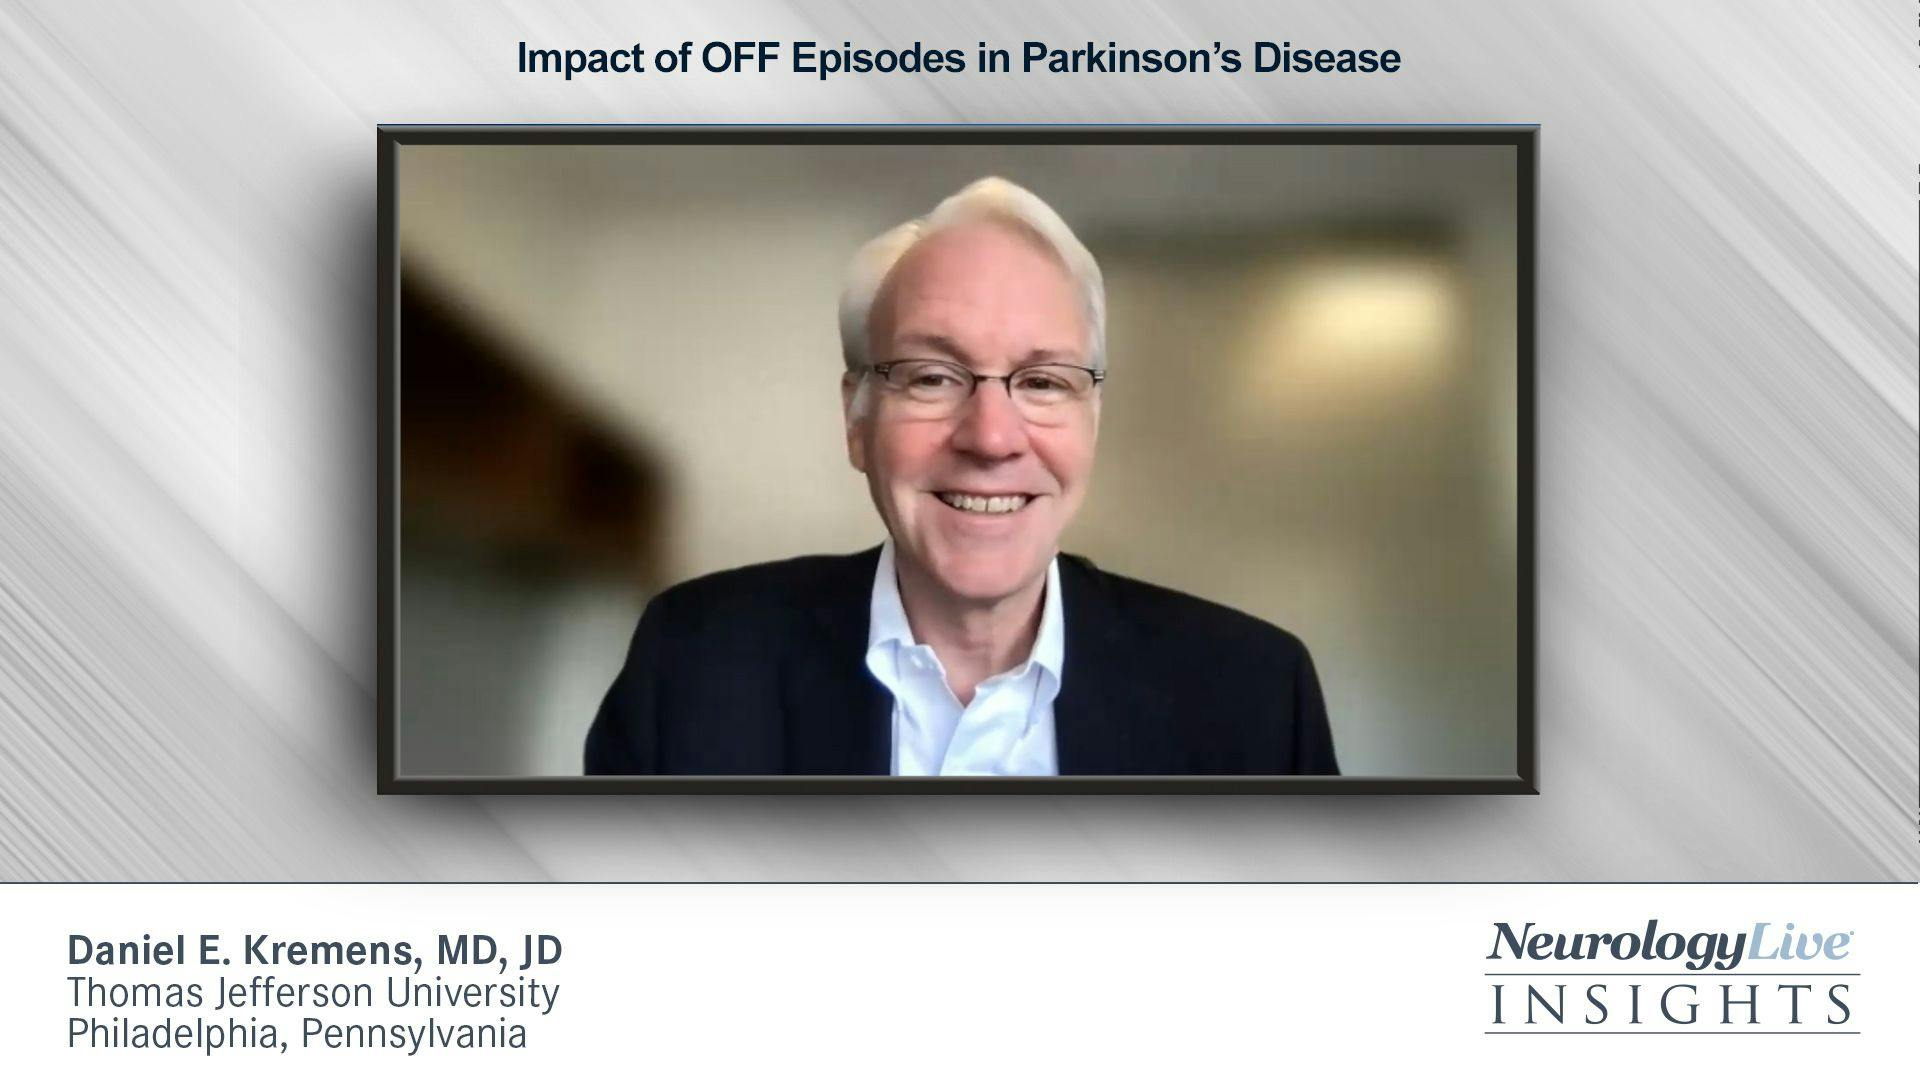 Addressing Inconsistencies and Challenges with Levodopa Therapy in Parkinson’s Disease